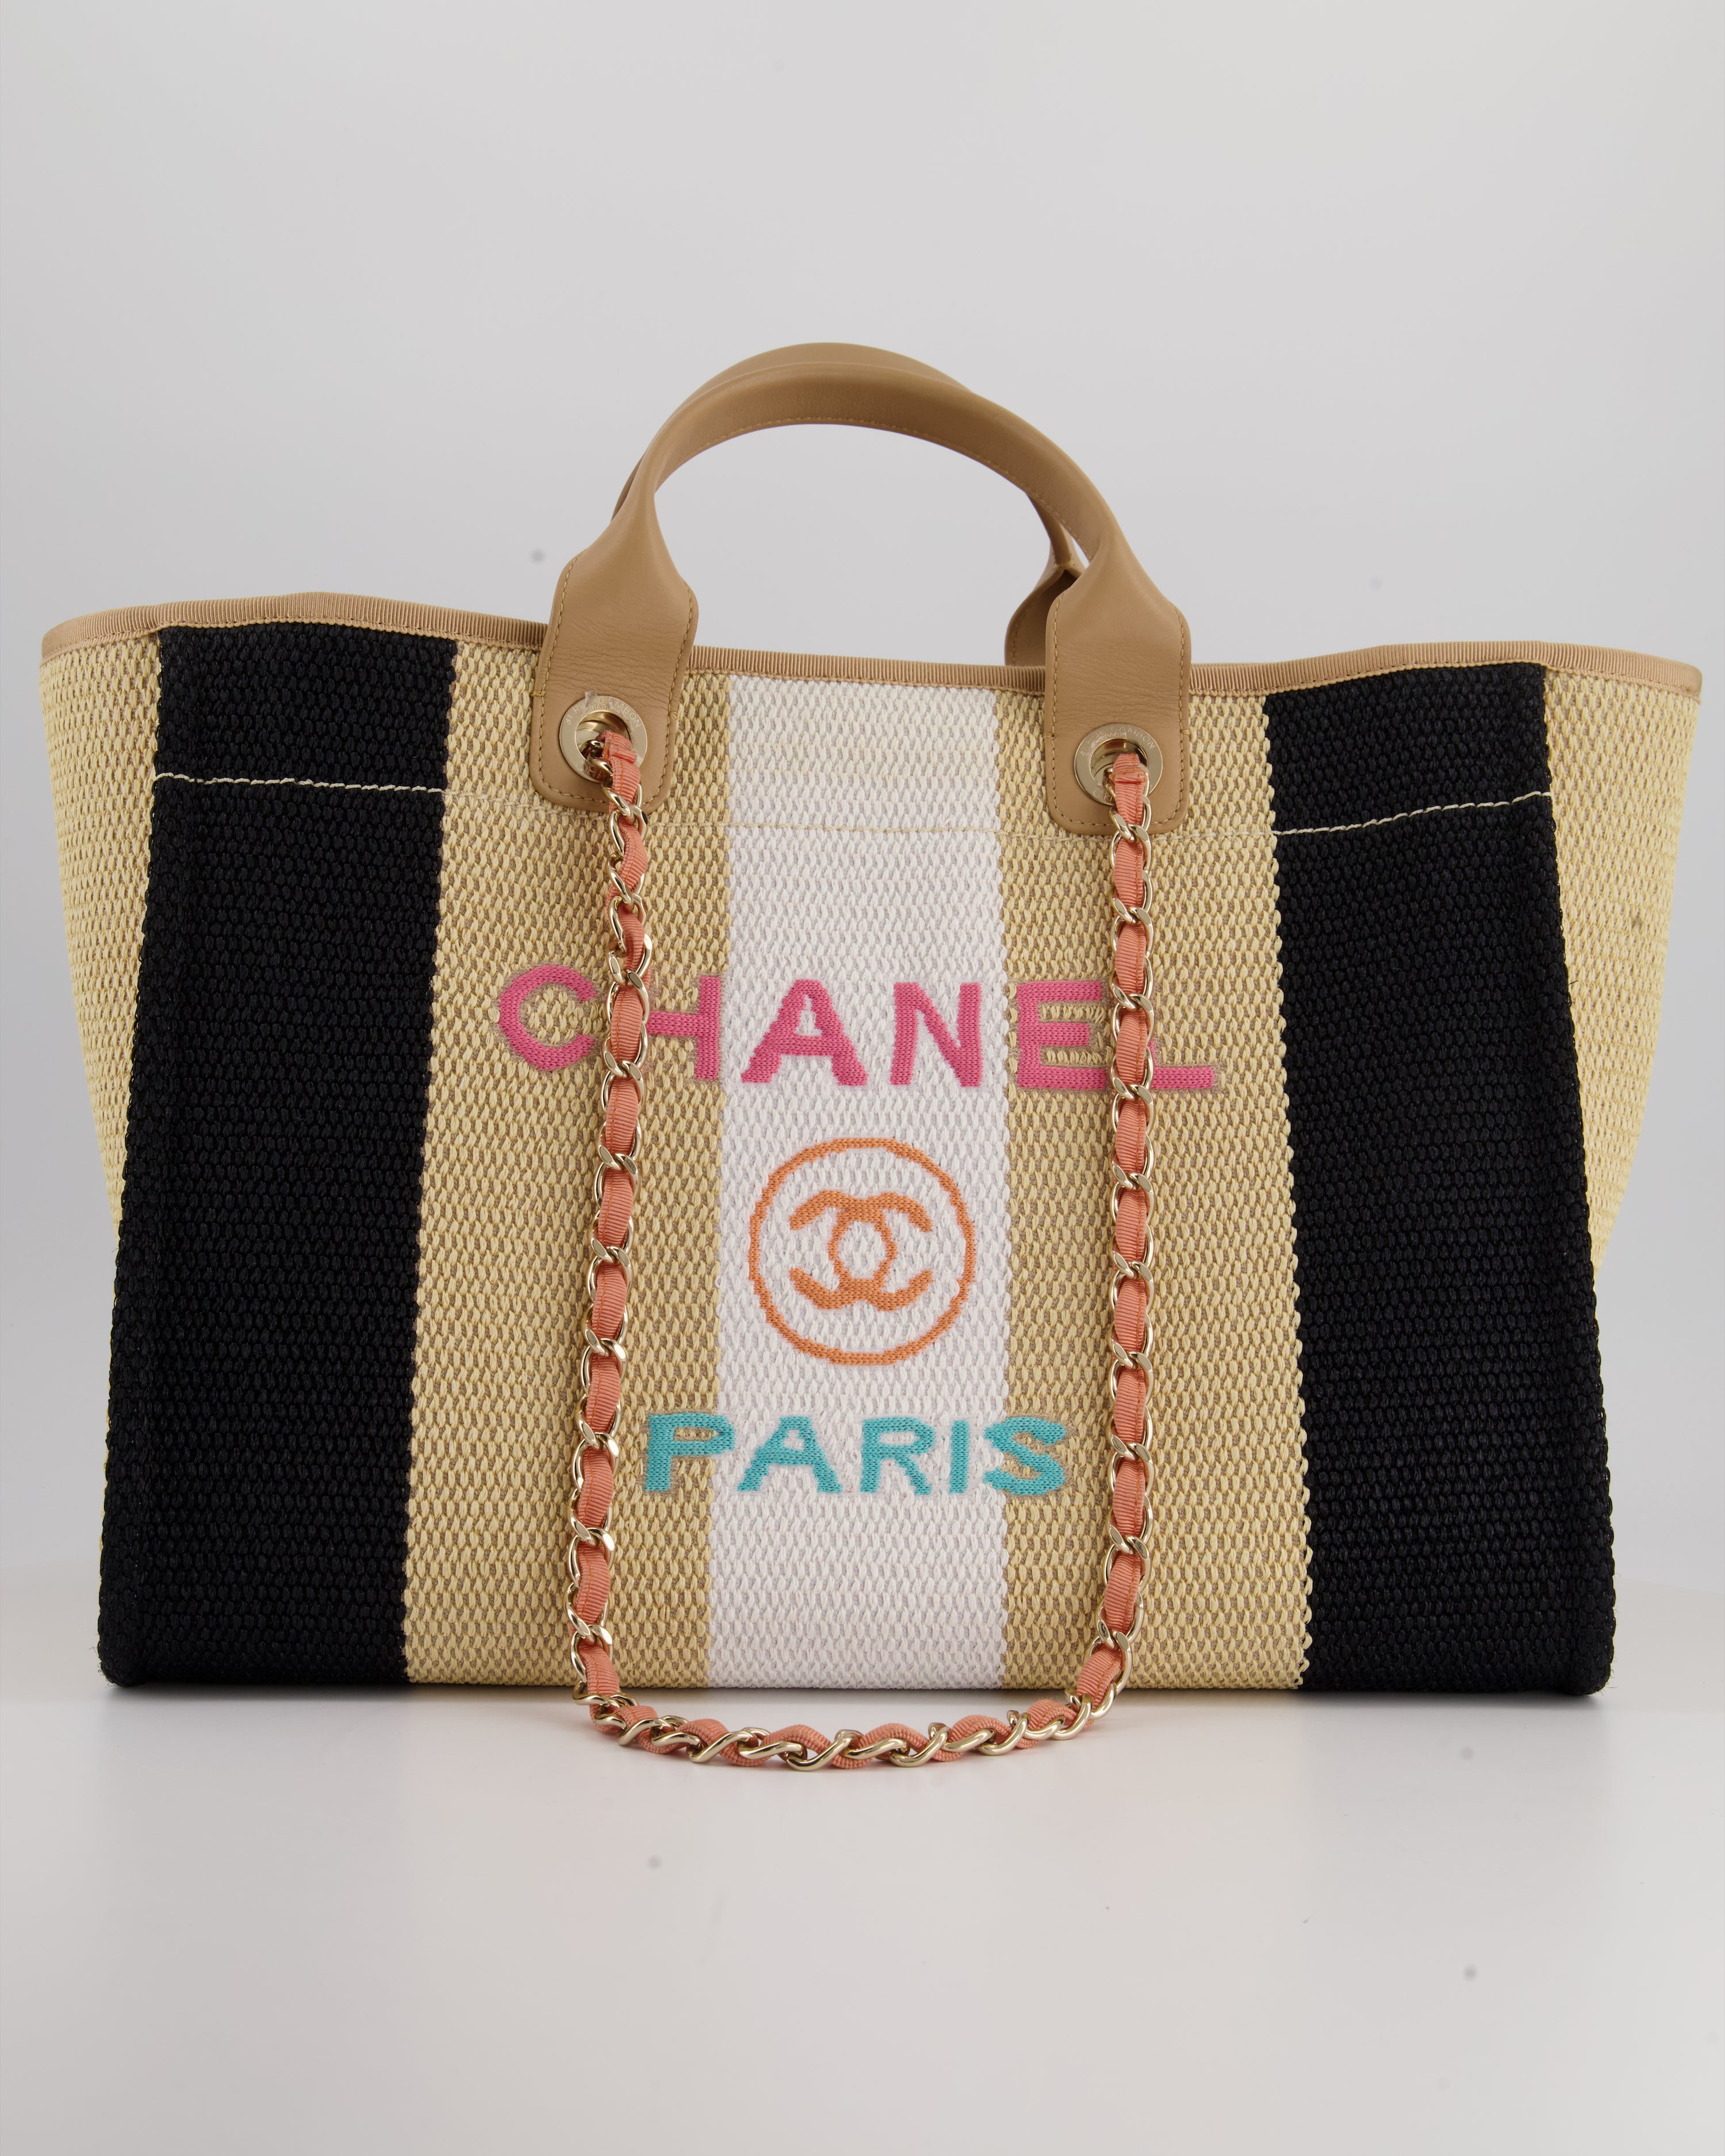 CHANEL Deauville Bags, Authenticity Guaranteed